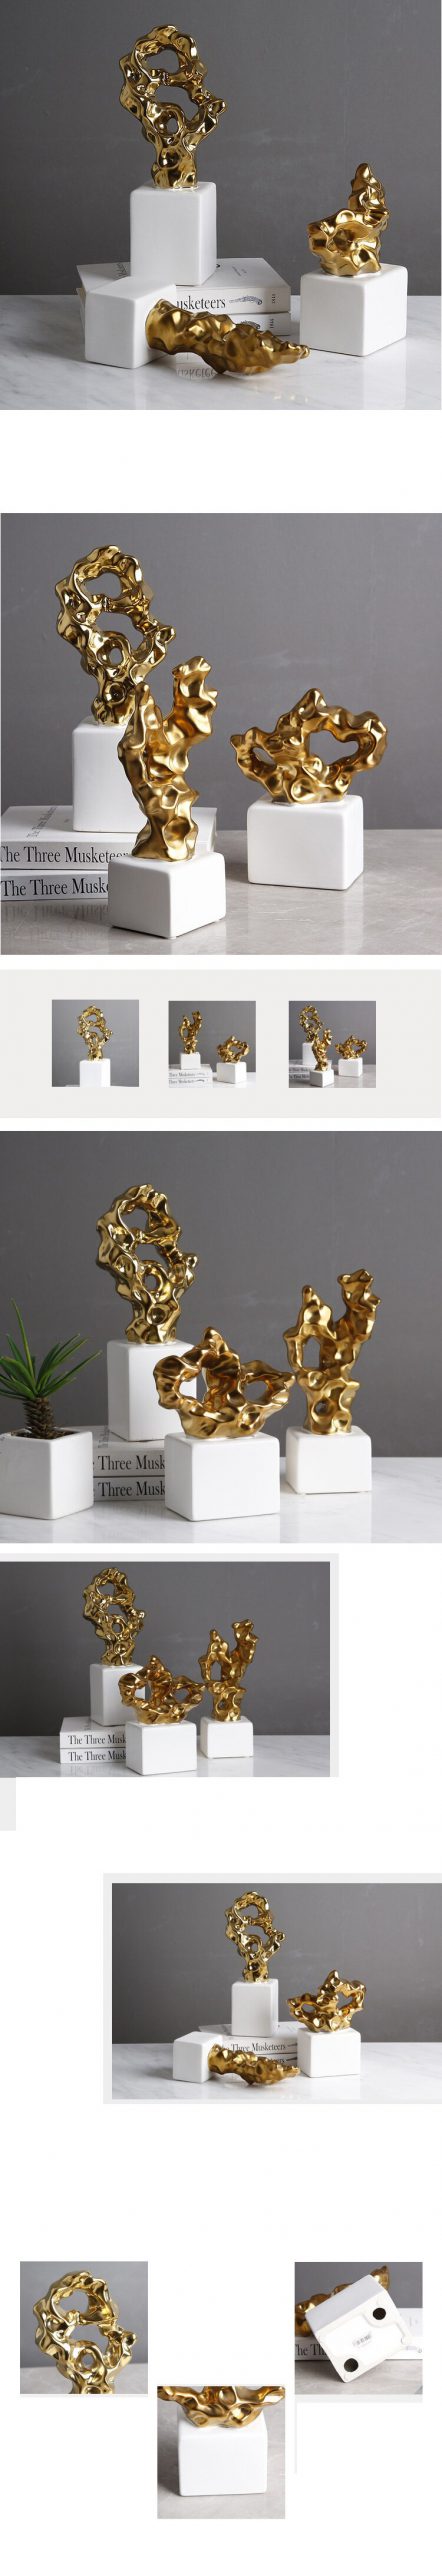 Modern House Home Decoration Maison Accessories Abstract Art Gold Plating Coral Ceramic Figurines For Living Room Office Desktop